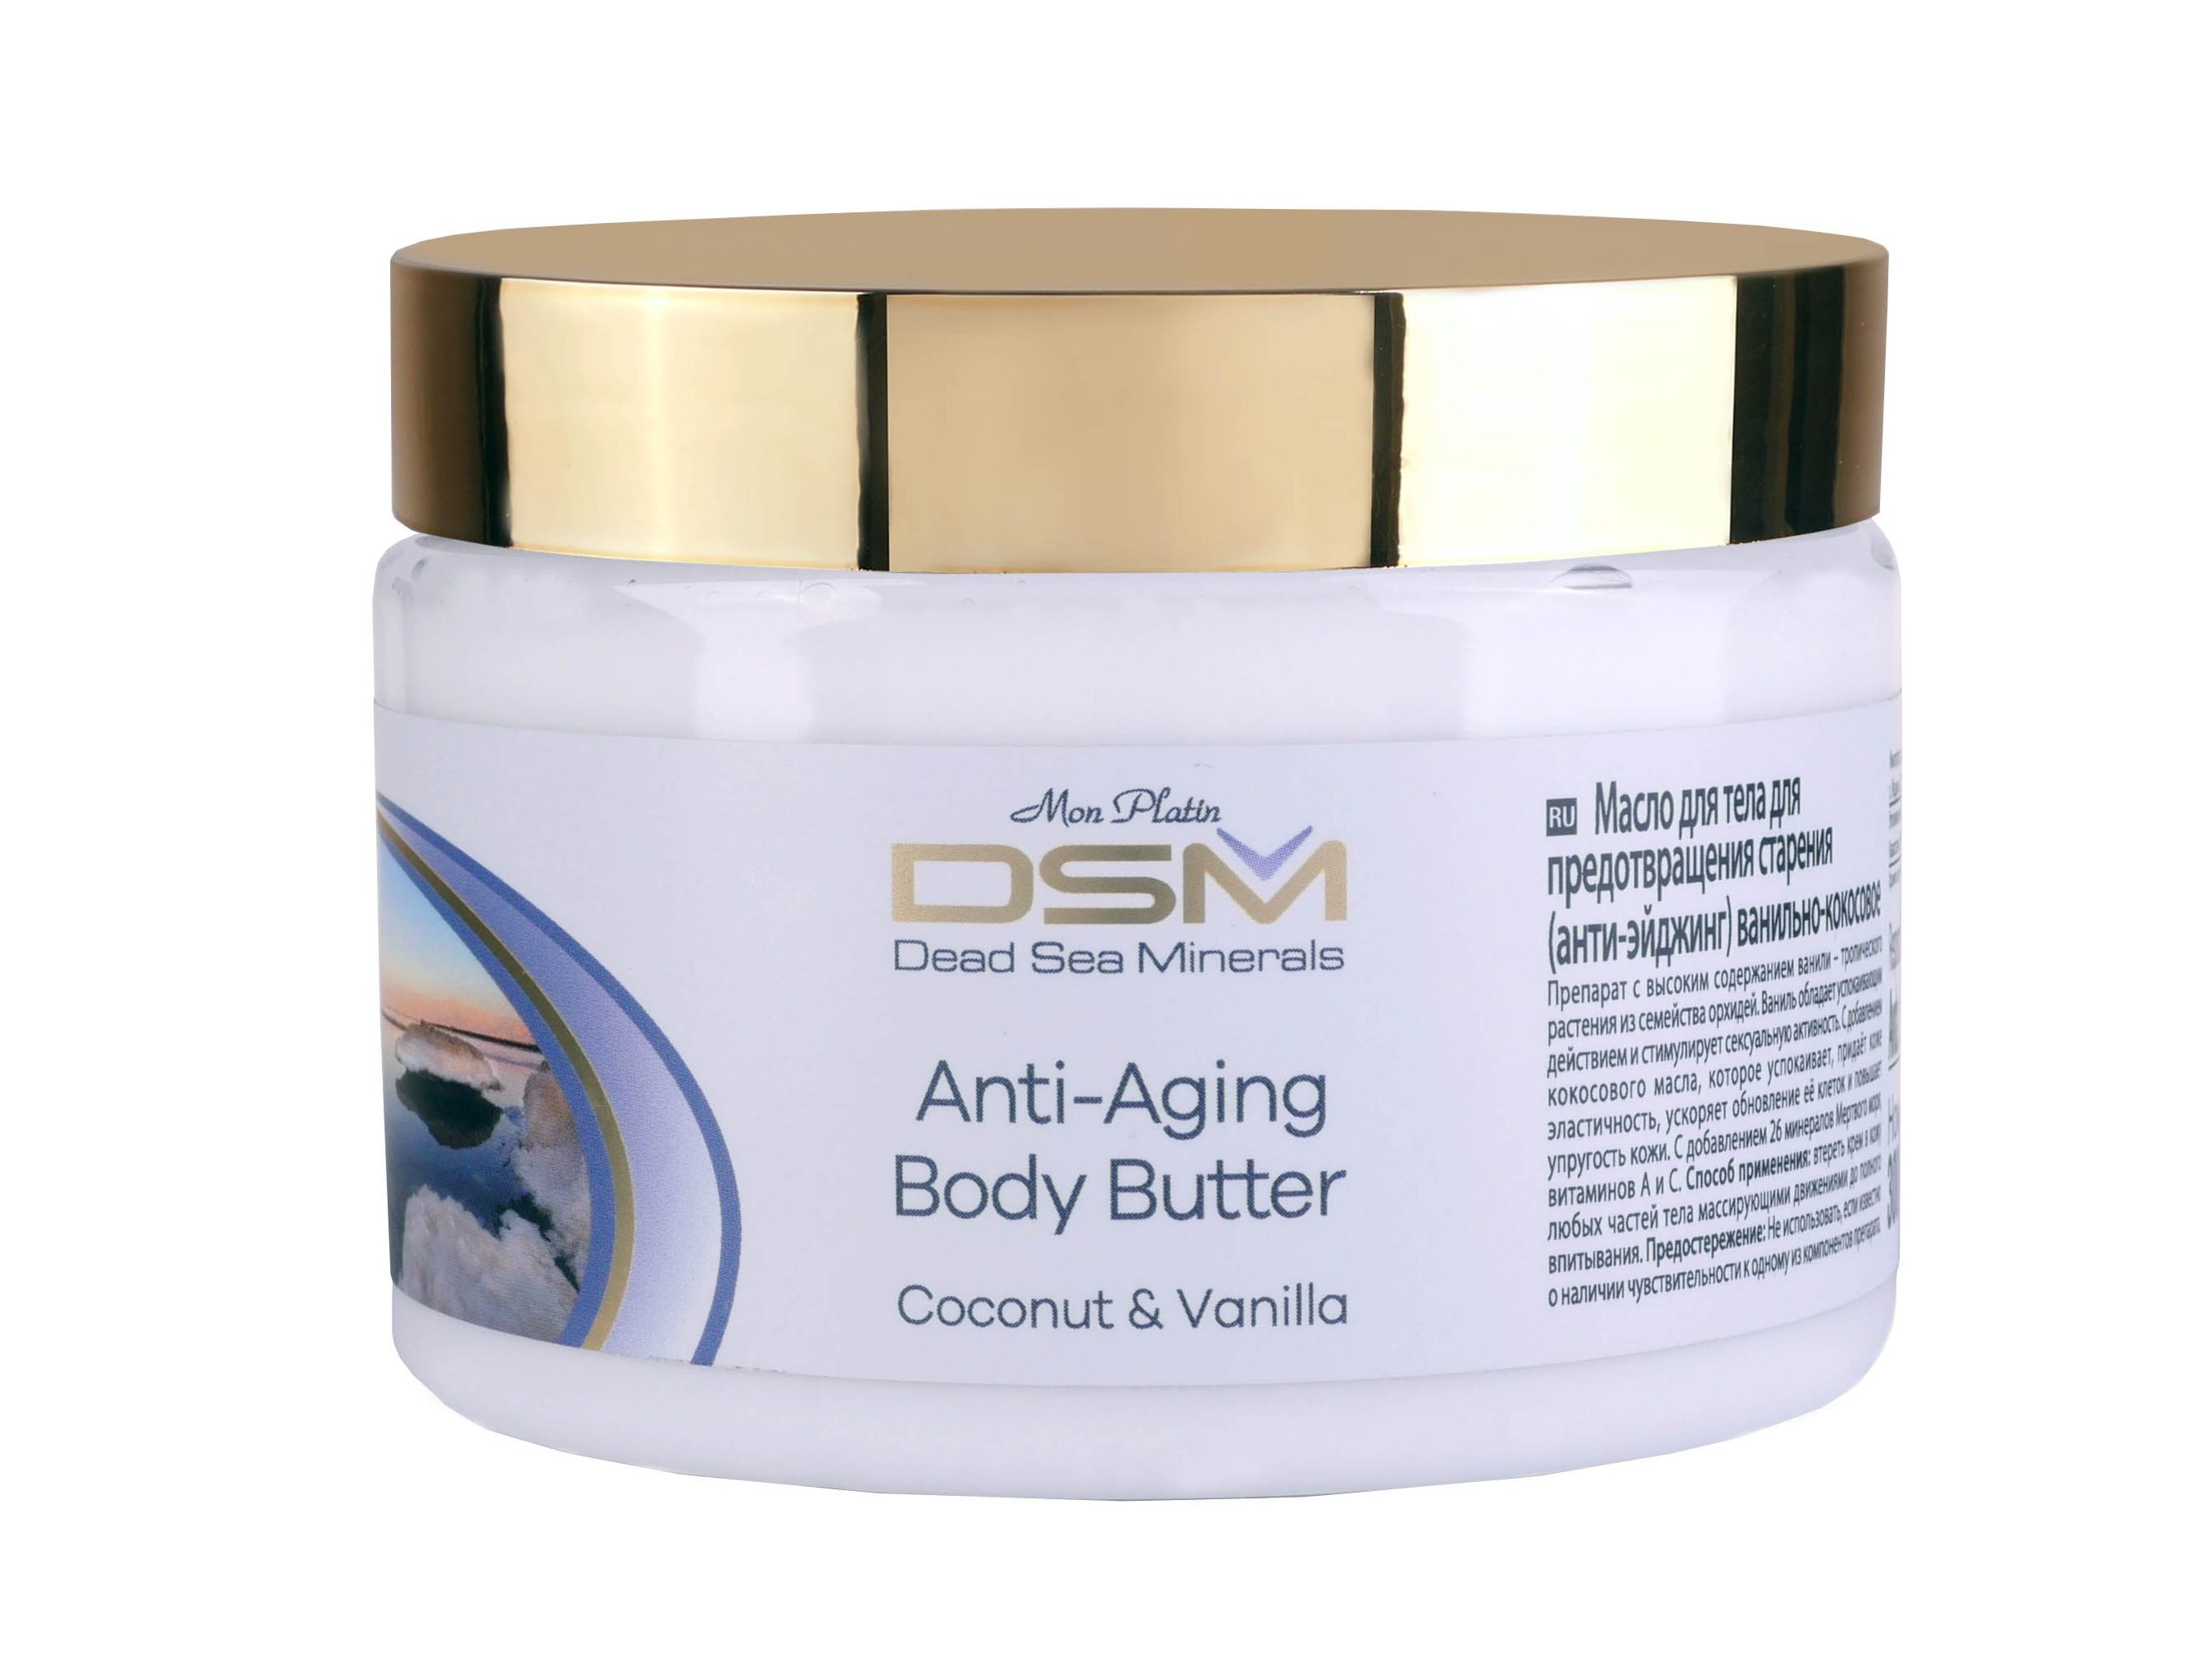 Anti-aging body butter with Coconut and Vanilla